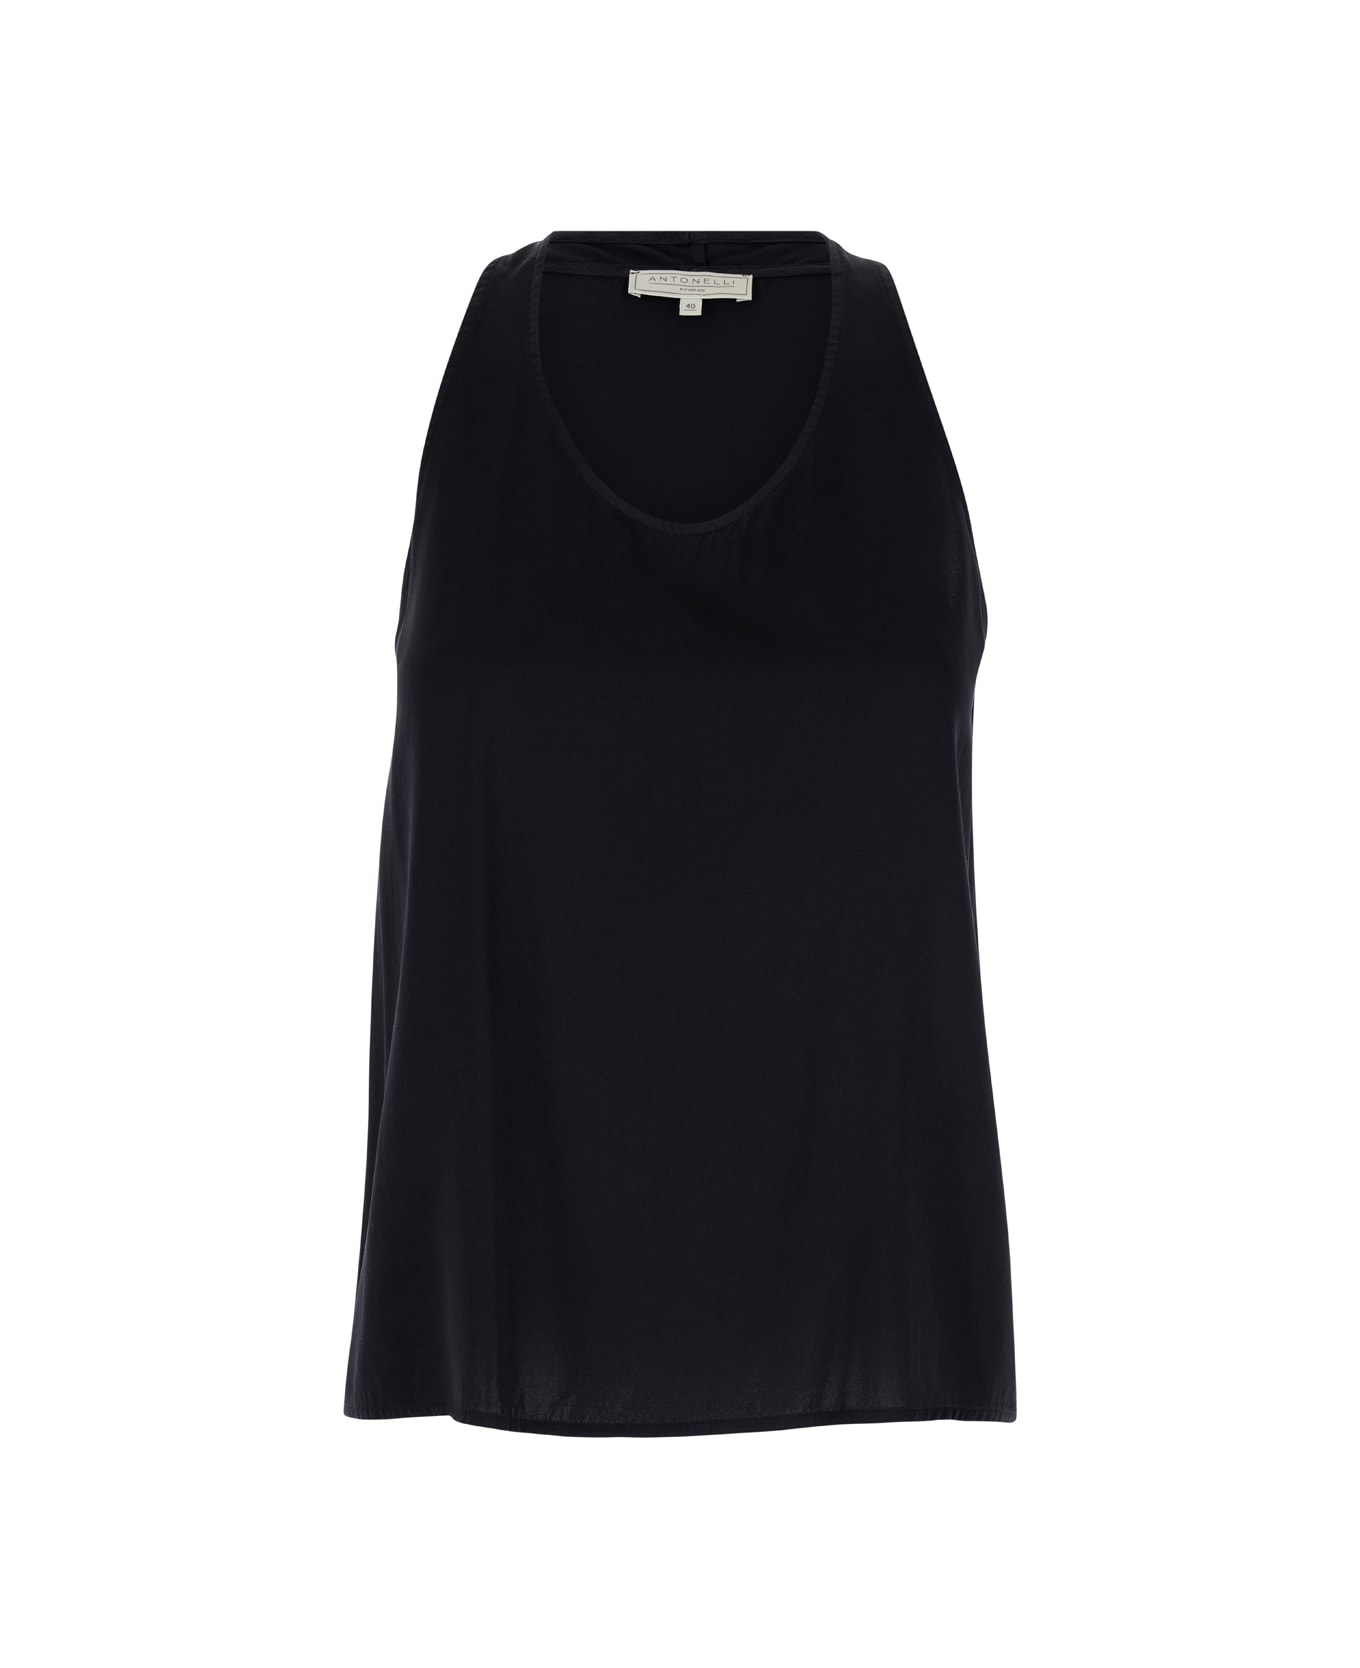 Antonelli Black Sleeveless And Flared Top In Silk Blend Woman - Black